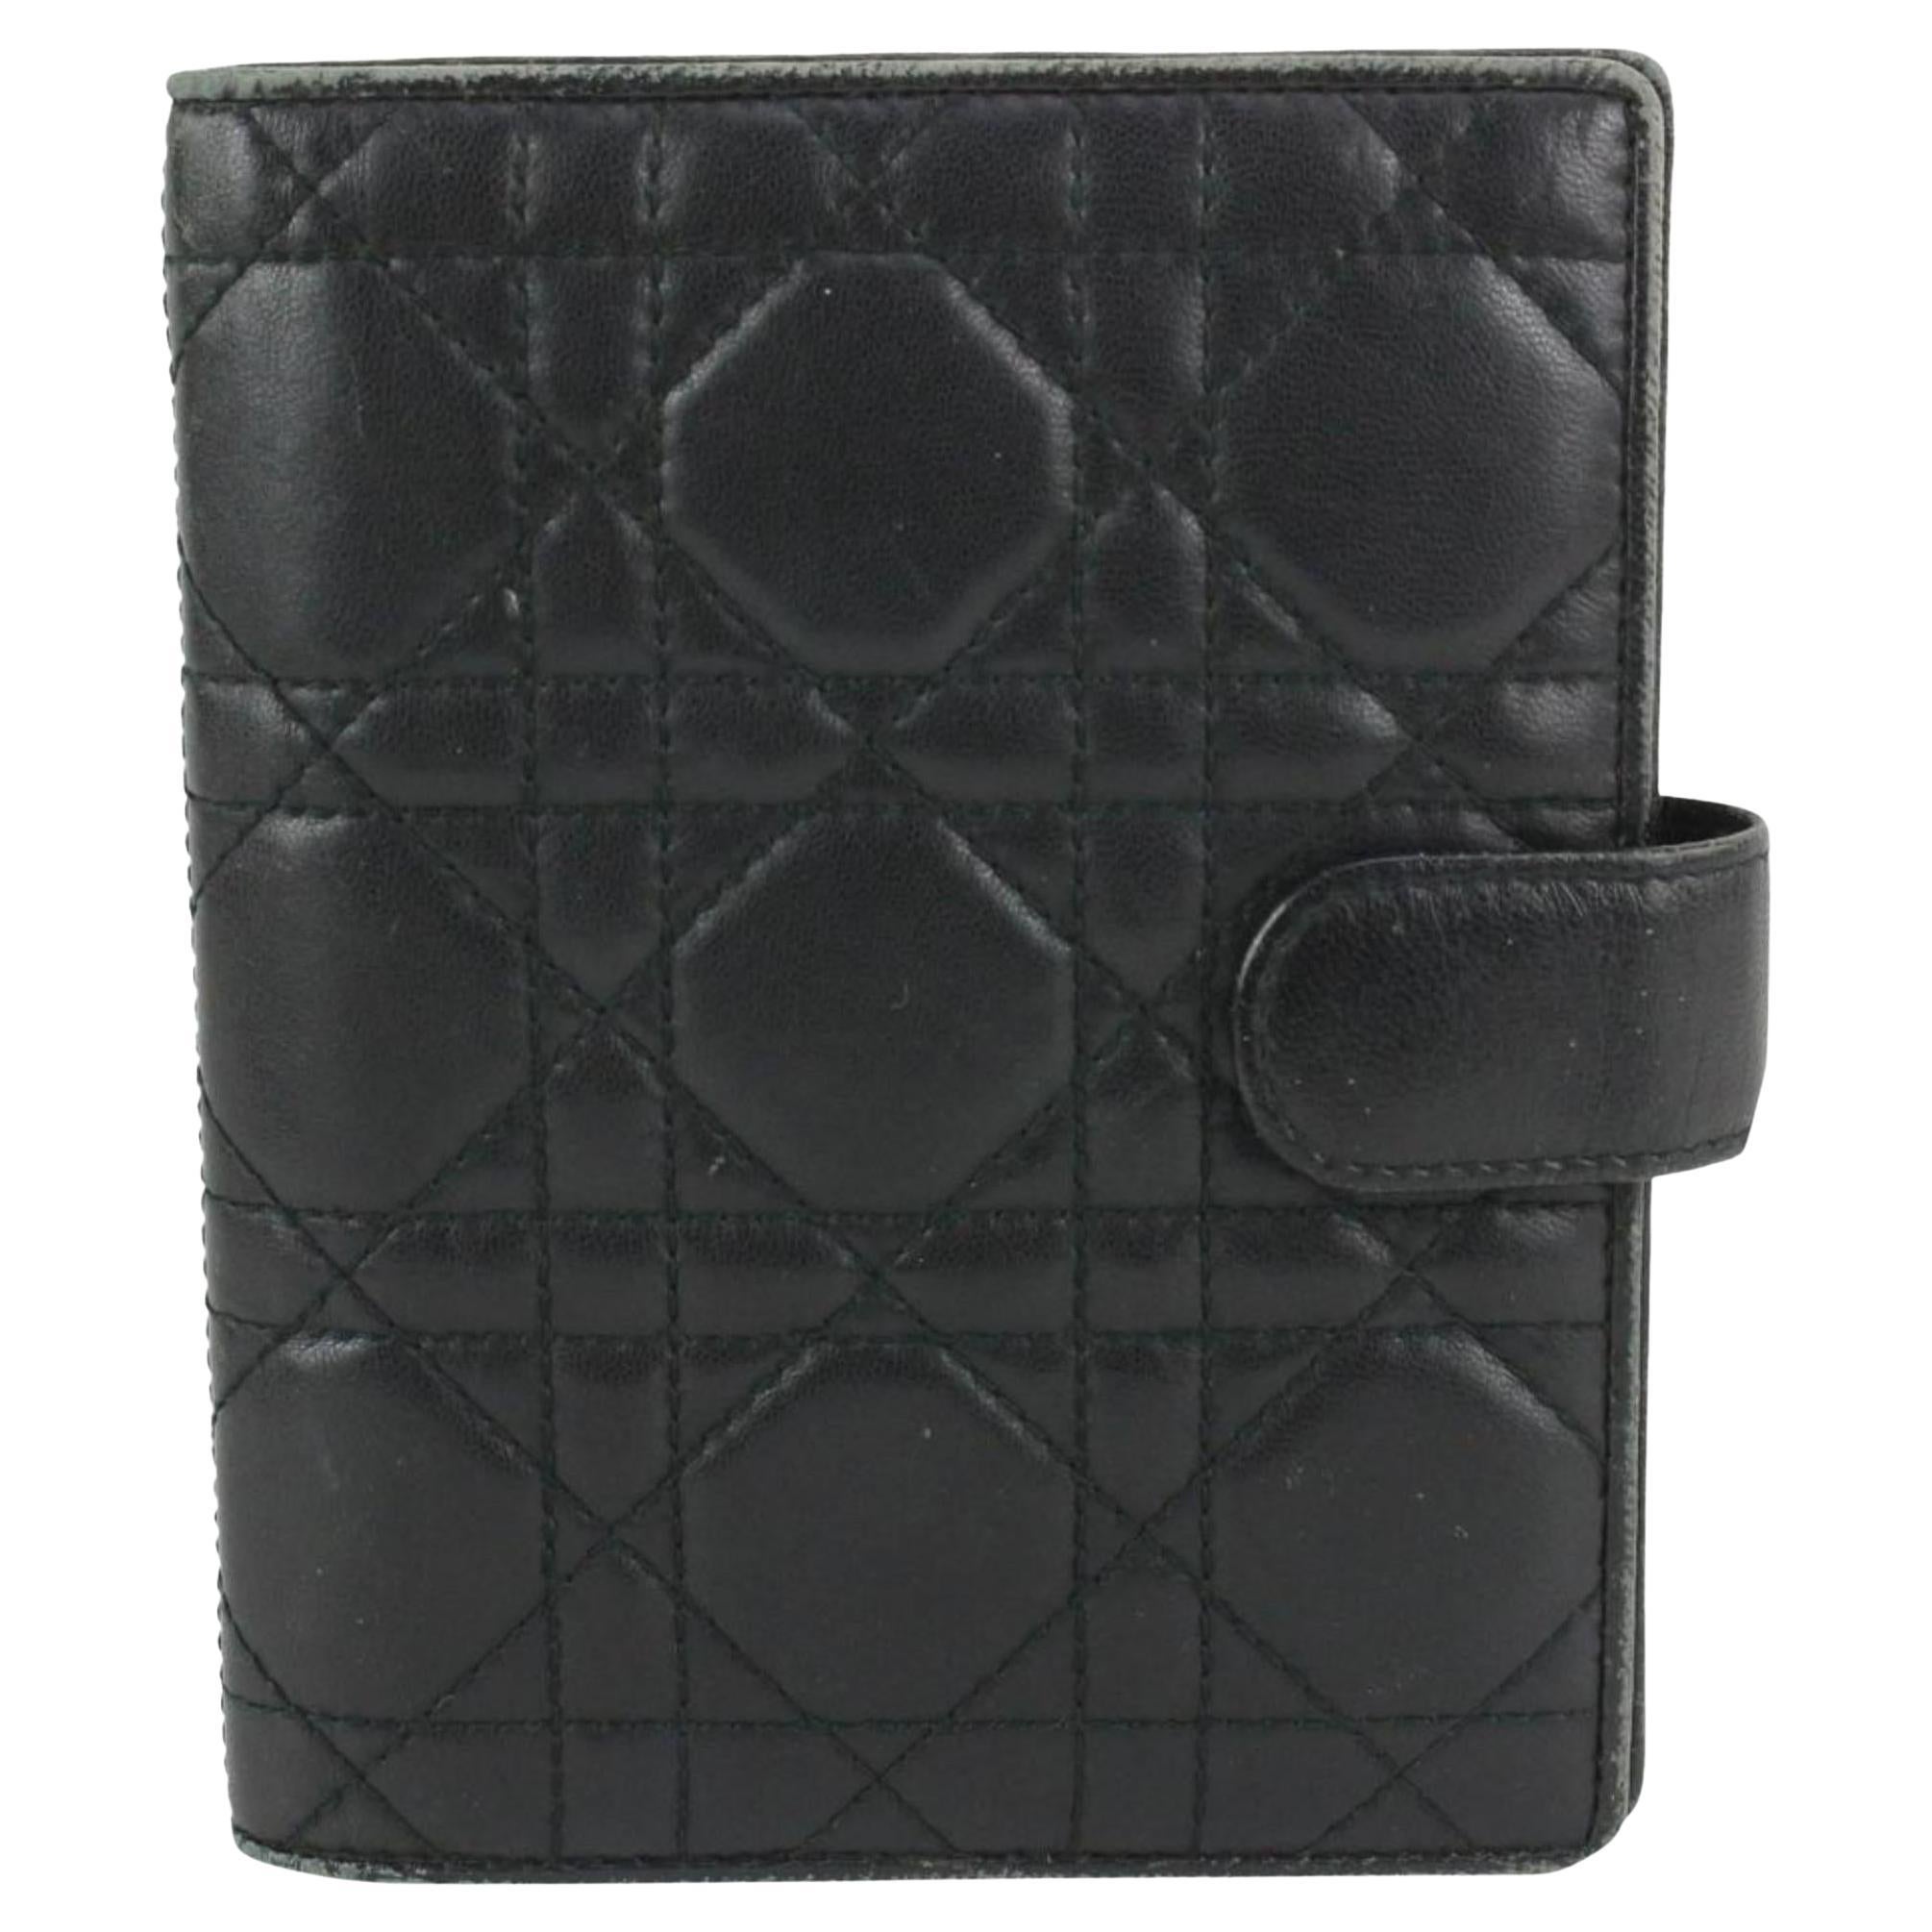 Dior Black Quilted Leather Cannage Small Agenda PM Notebook Cover 923da1